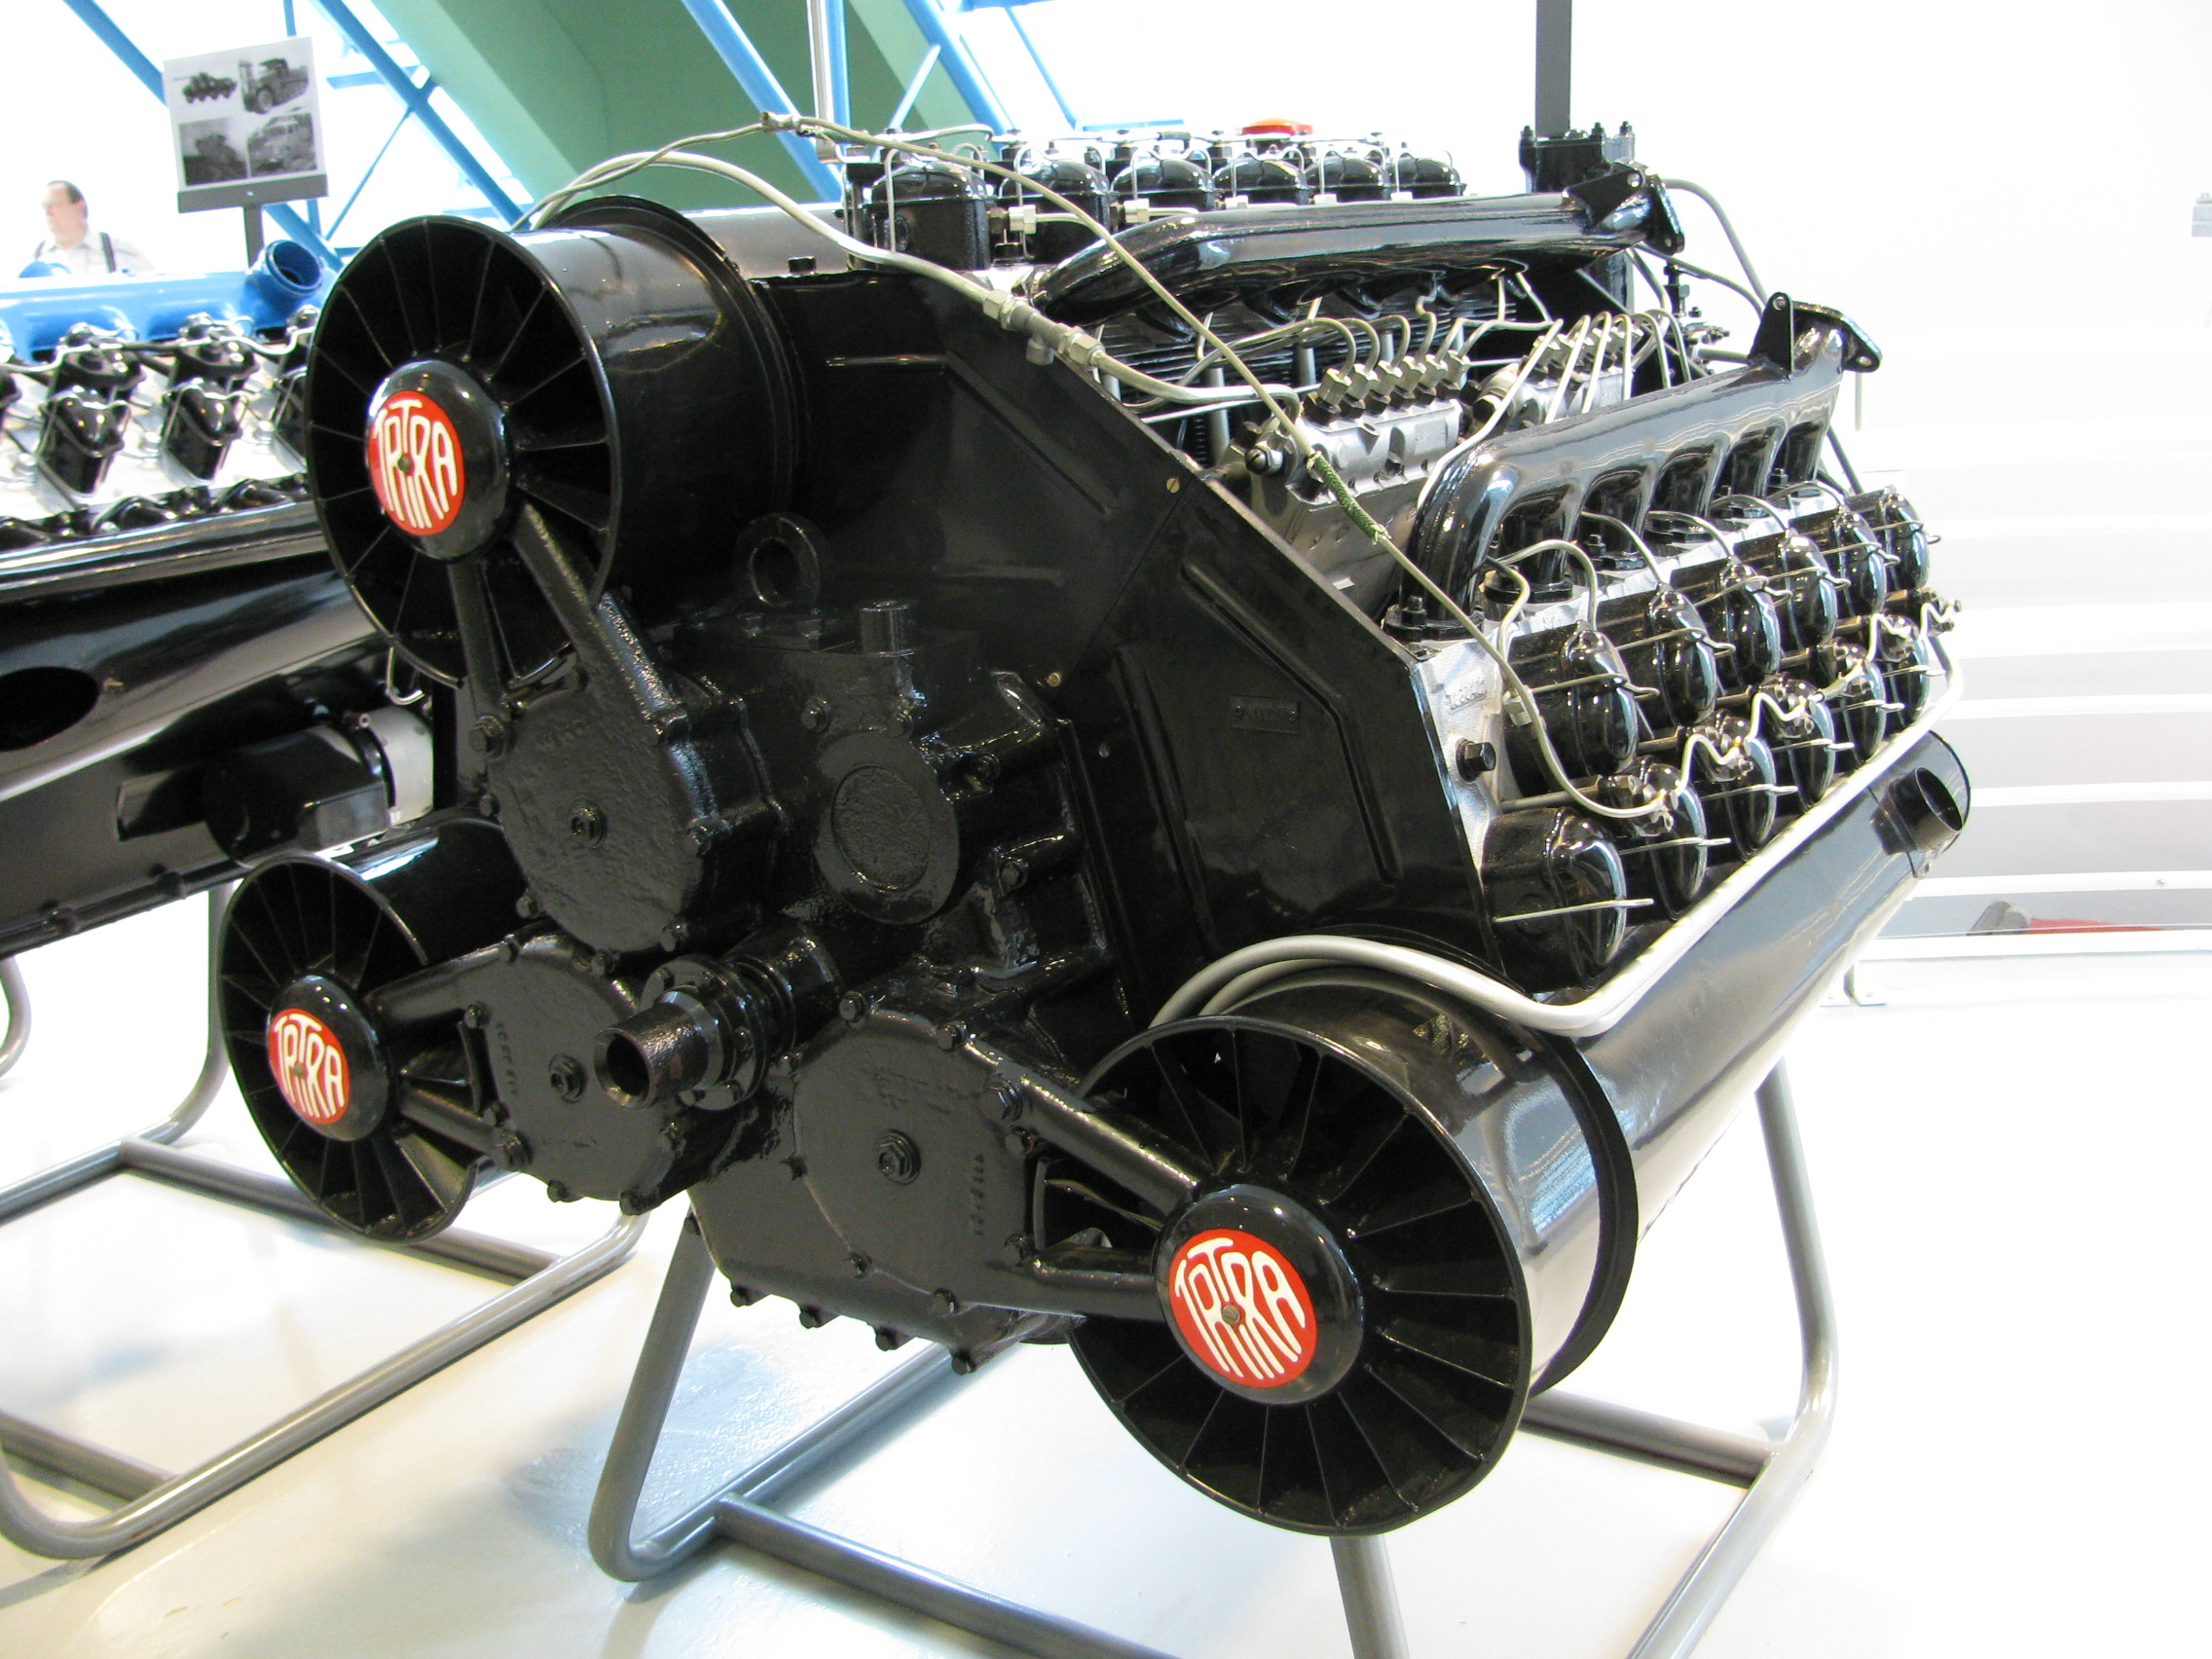 Tatra T955, an air-cooled 22-liter W18 diesel engine prototype from 1943